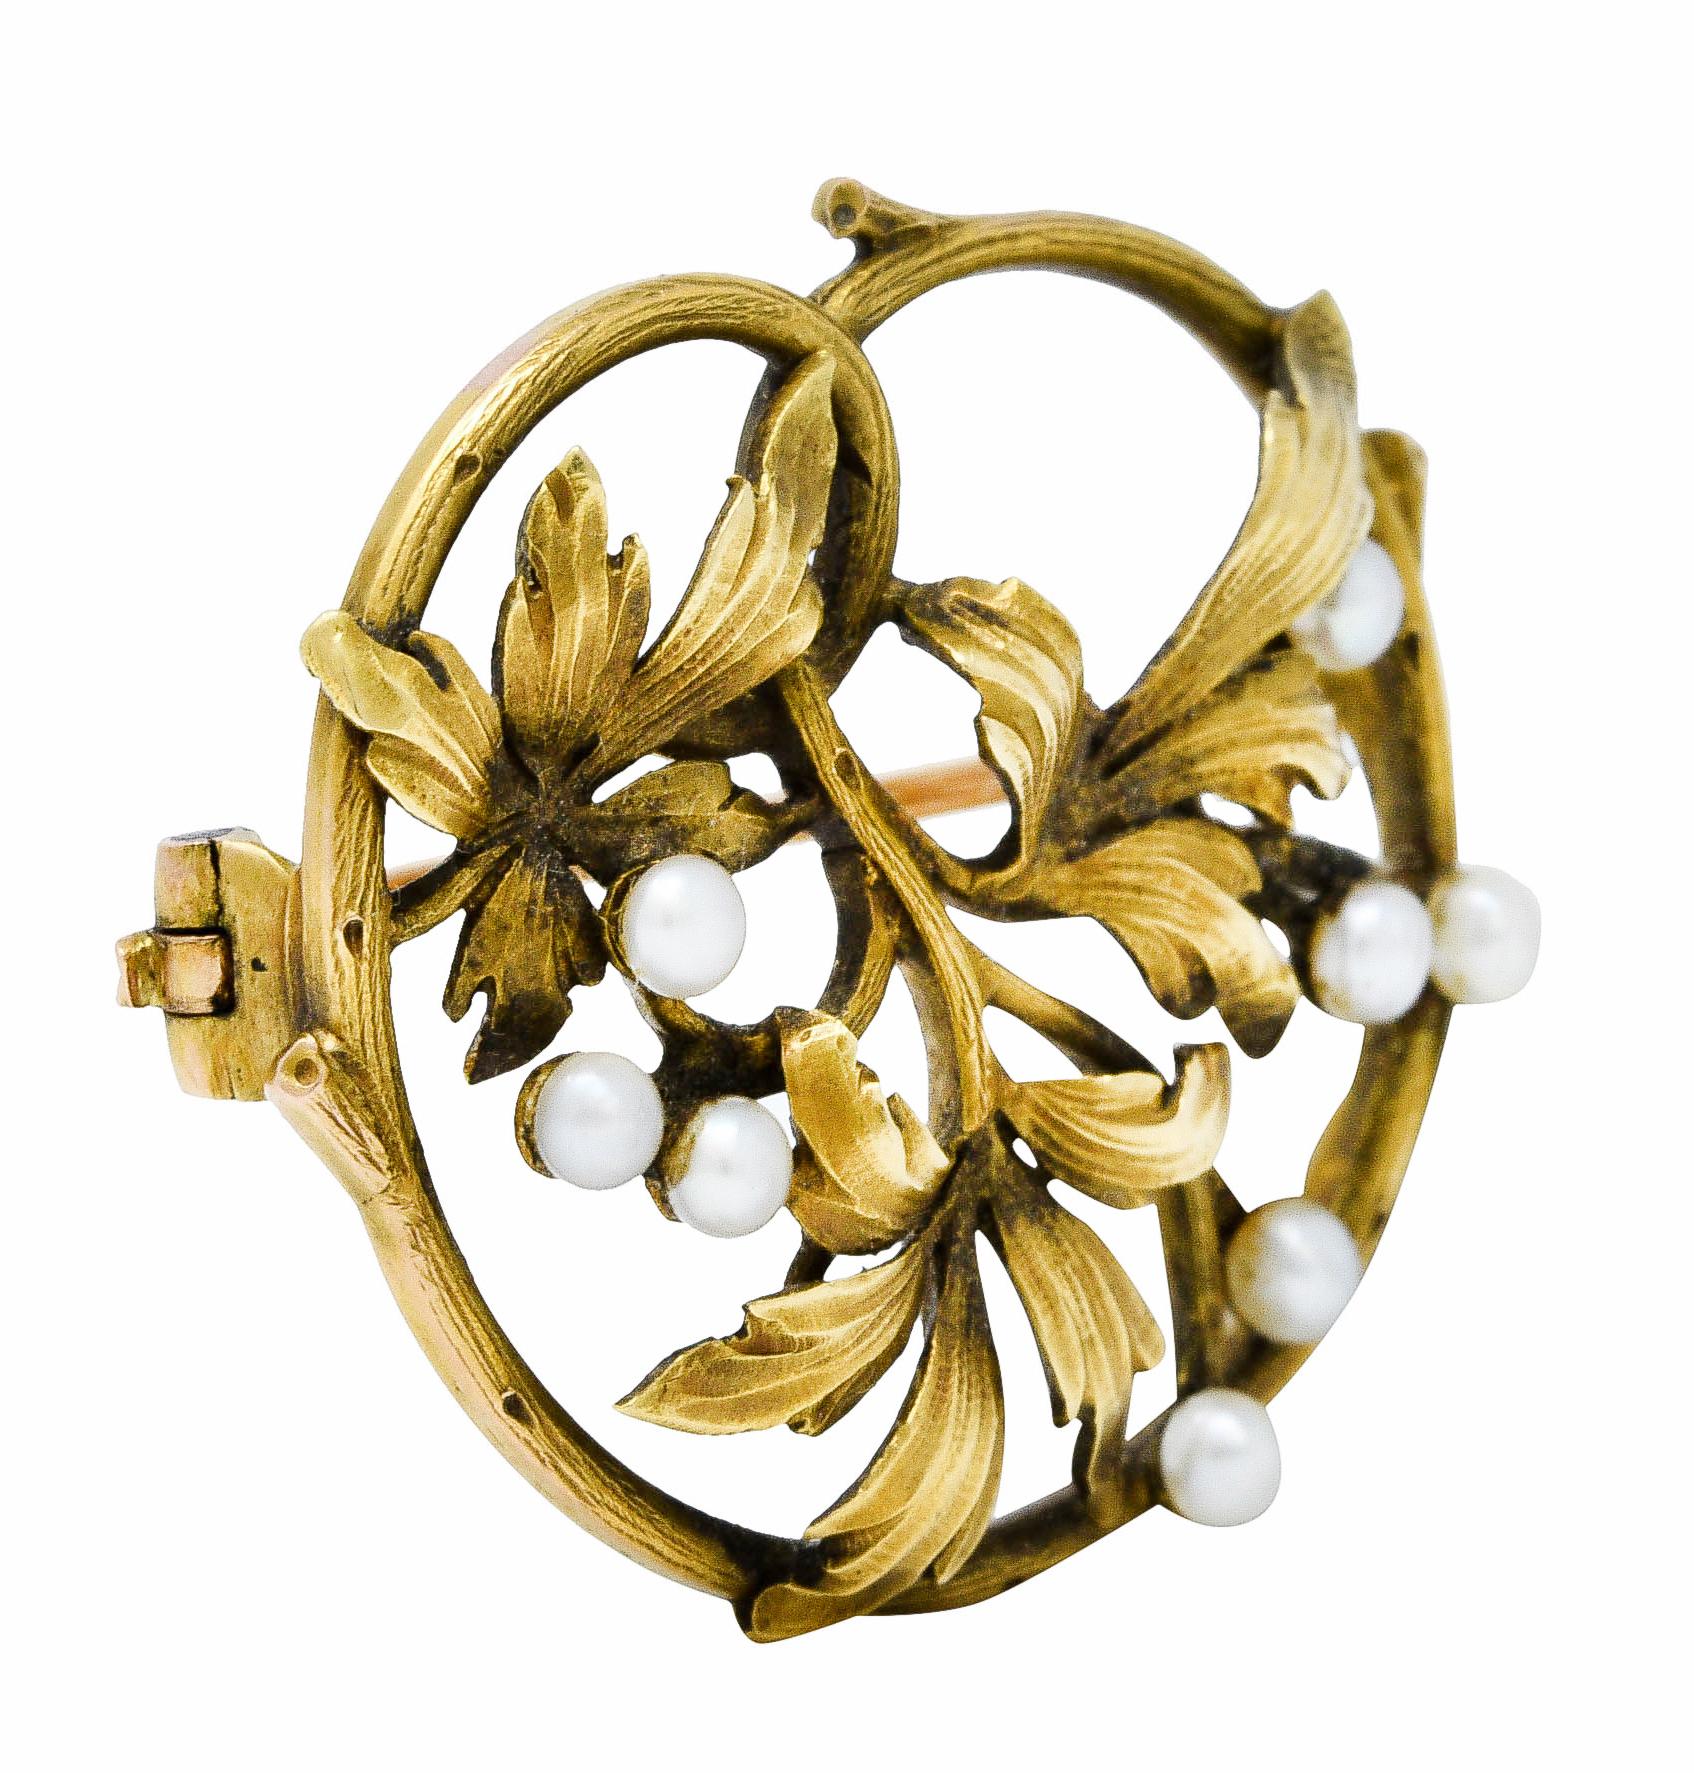 Circular brooch is comprised of a winding stem an three dynamically rendered ivy leaves

Accented by 2.5 mm white pearls with moderate to strong iridescence

Completed by a pin stem with closure

With maker's mark and French assay mark for 18 karat